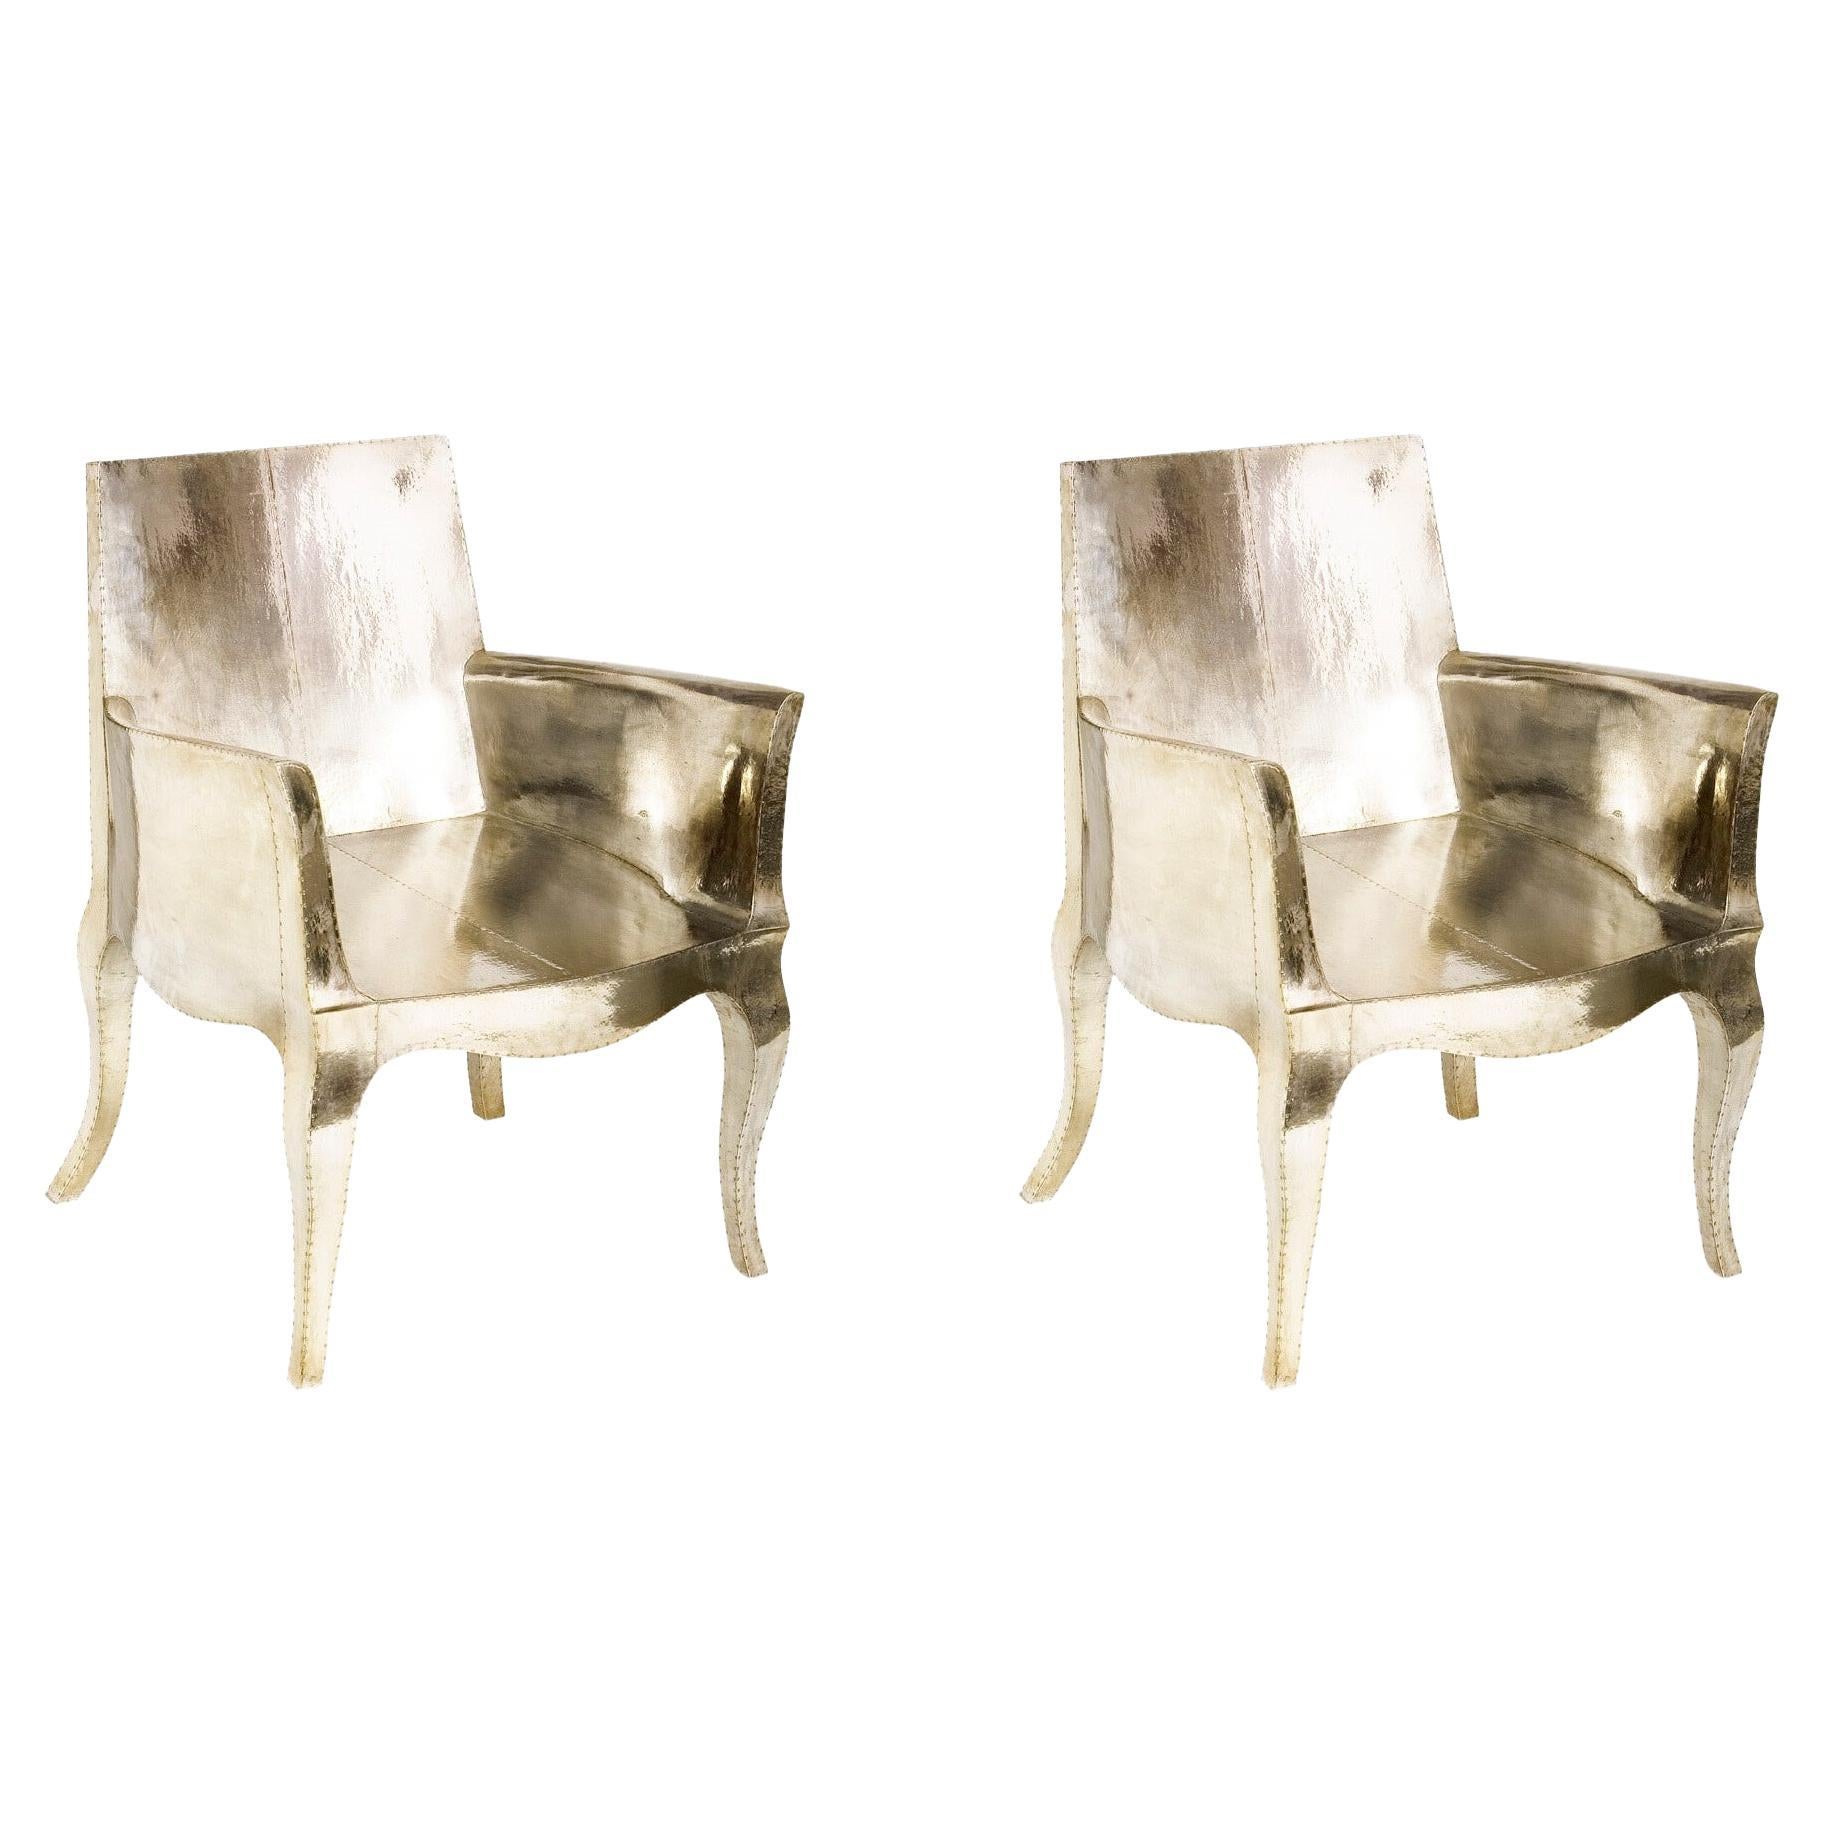 Art Deco Lounge Chair Pair Designed by Paul Mathieu for Stephanie Odegard For Sale